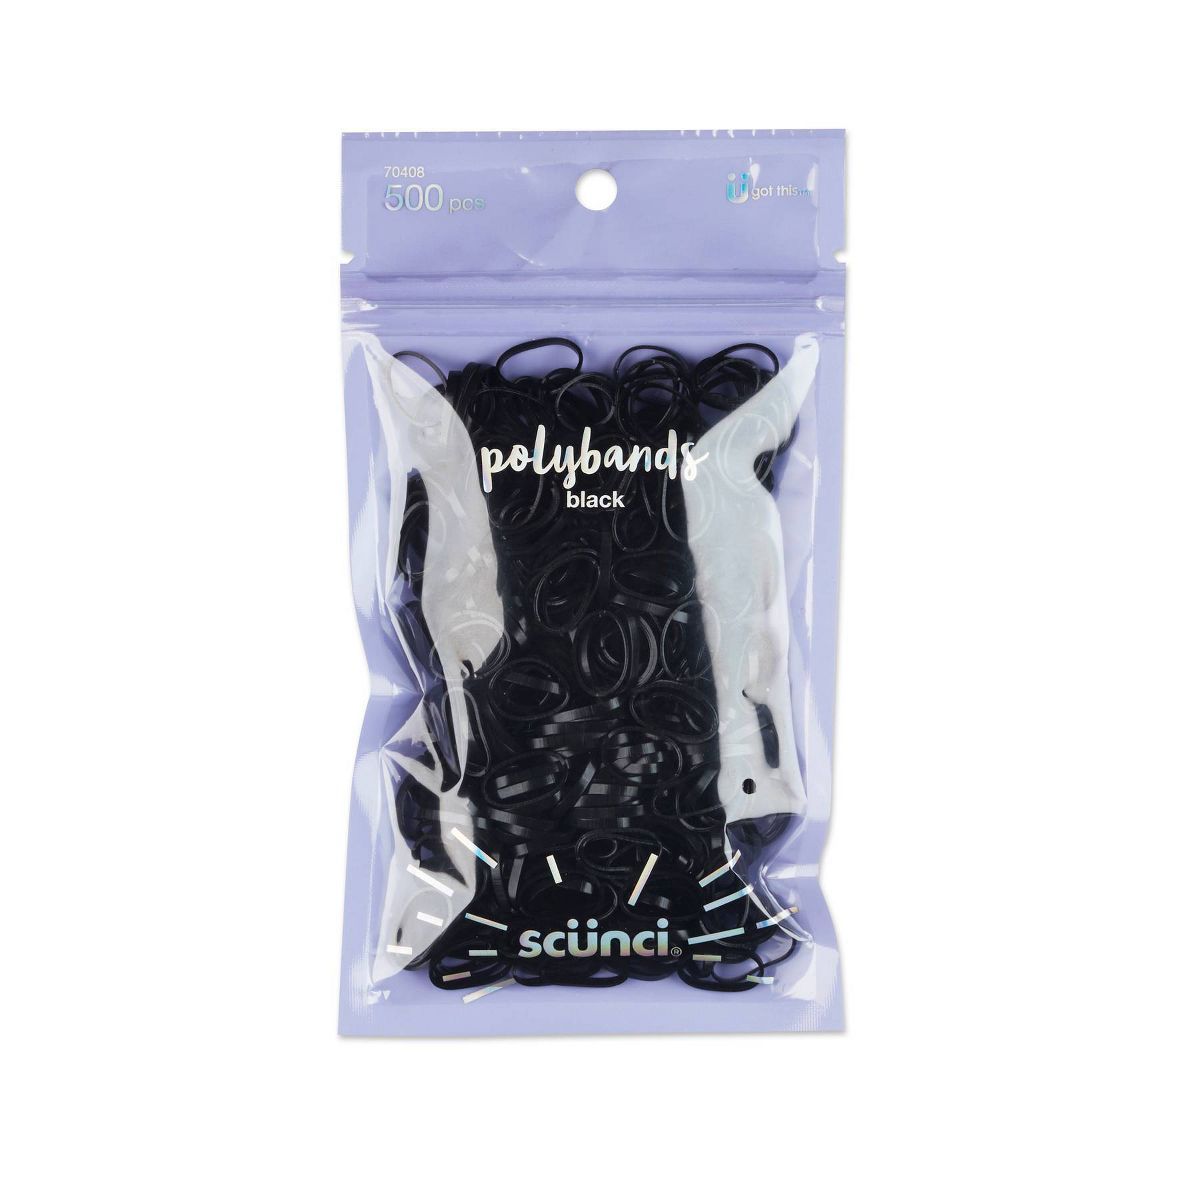 scunci Polyband Hair Ties in Resealable Pouch - 500pk -  Black | Target